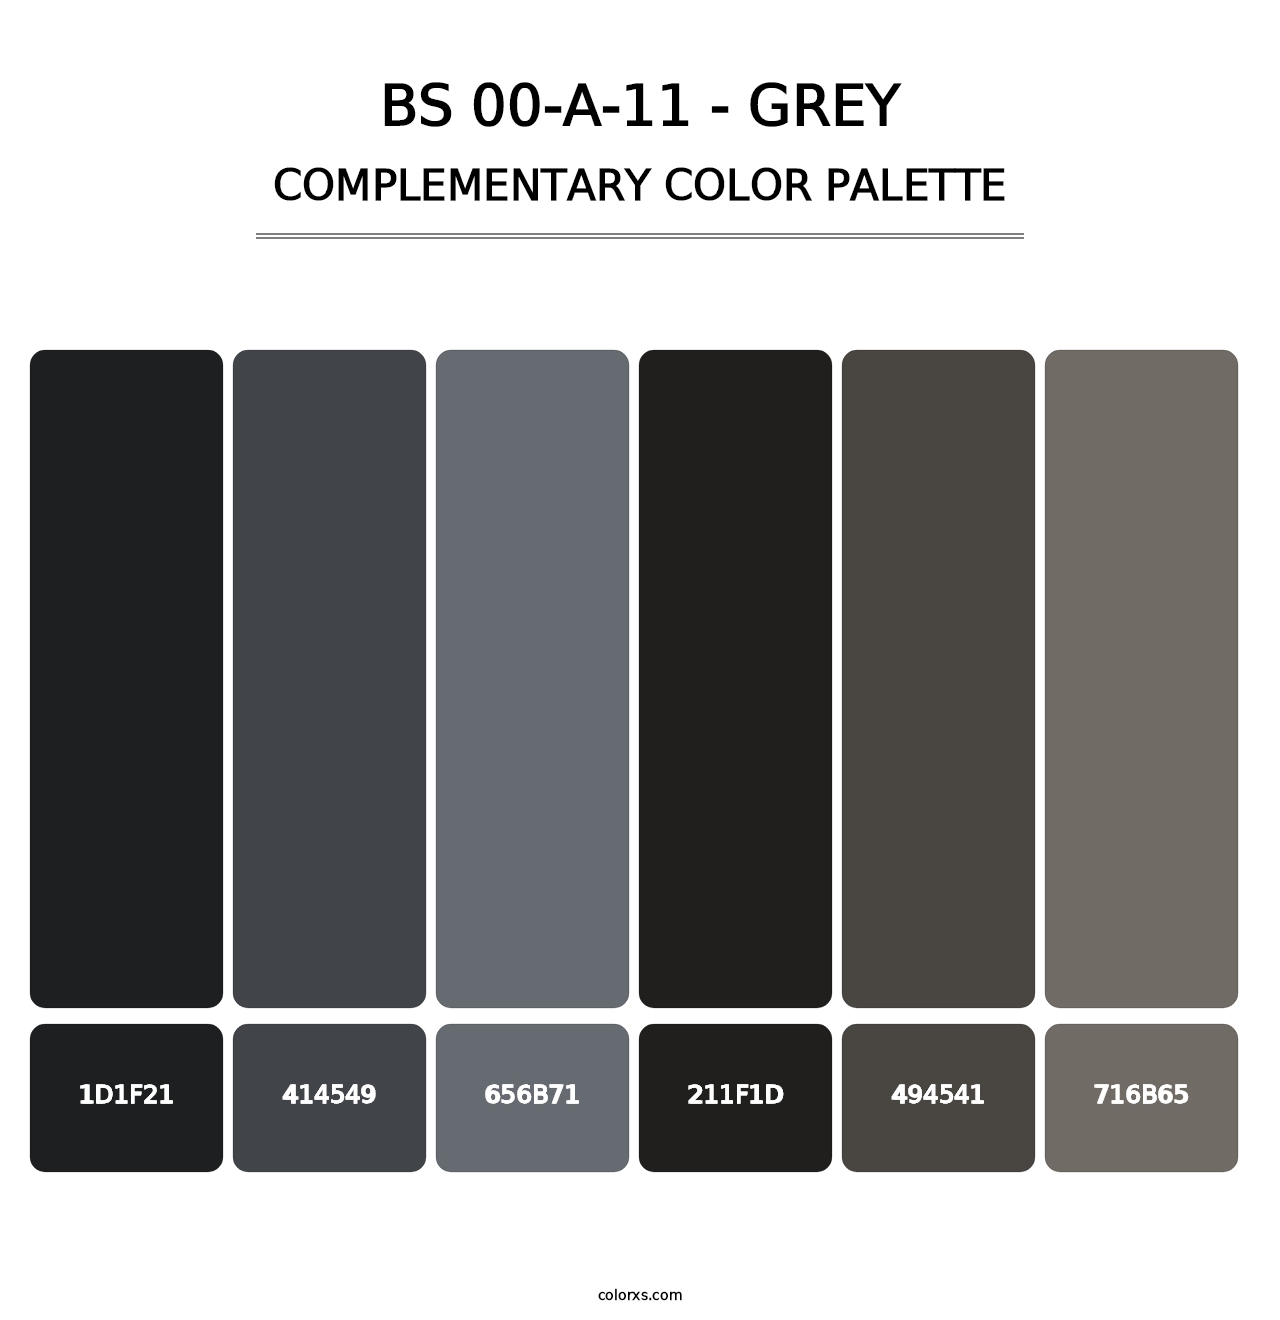 BS 00-A-11 - Grey - Complementary Color Palette